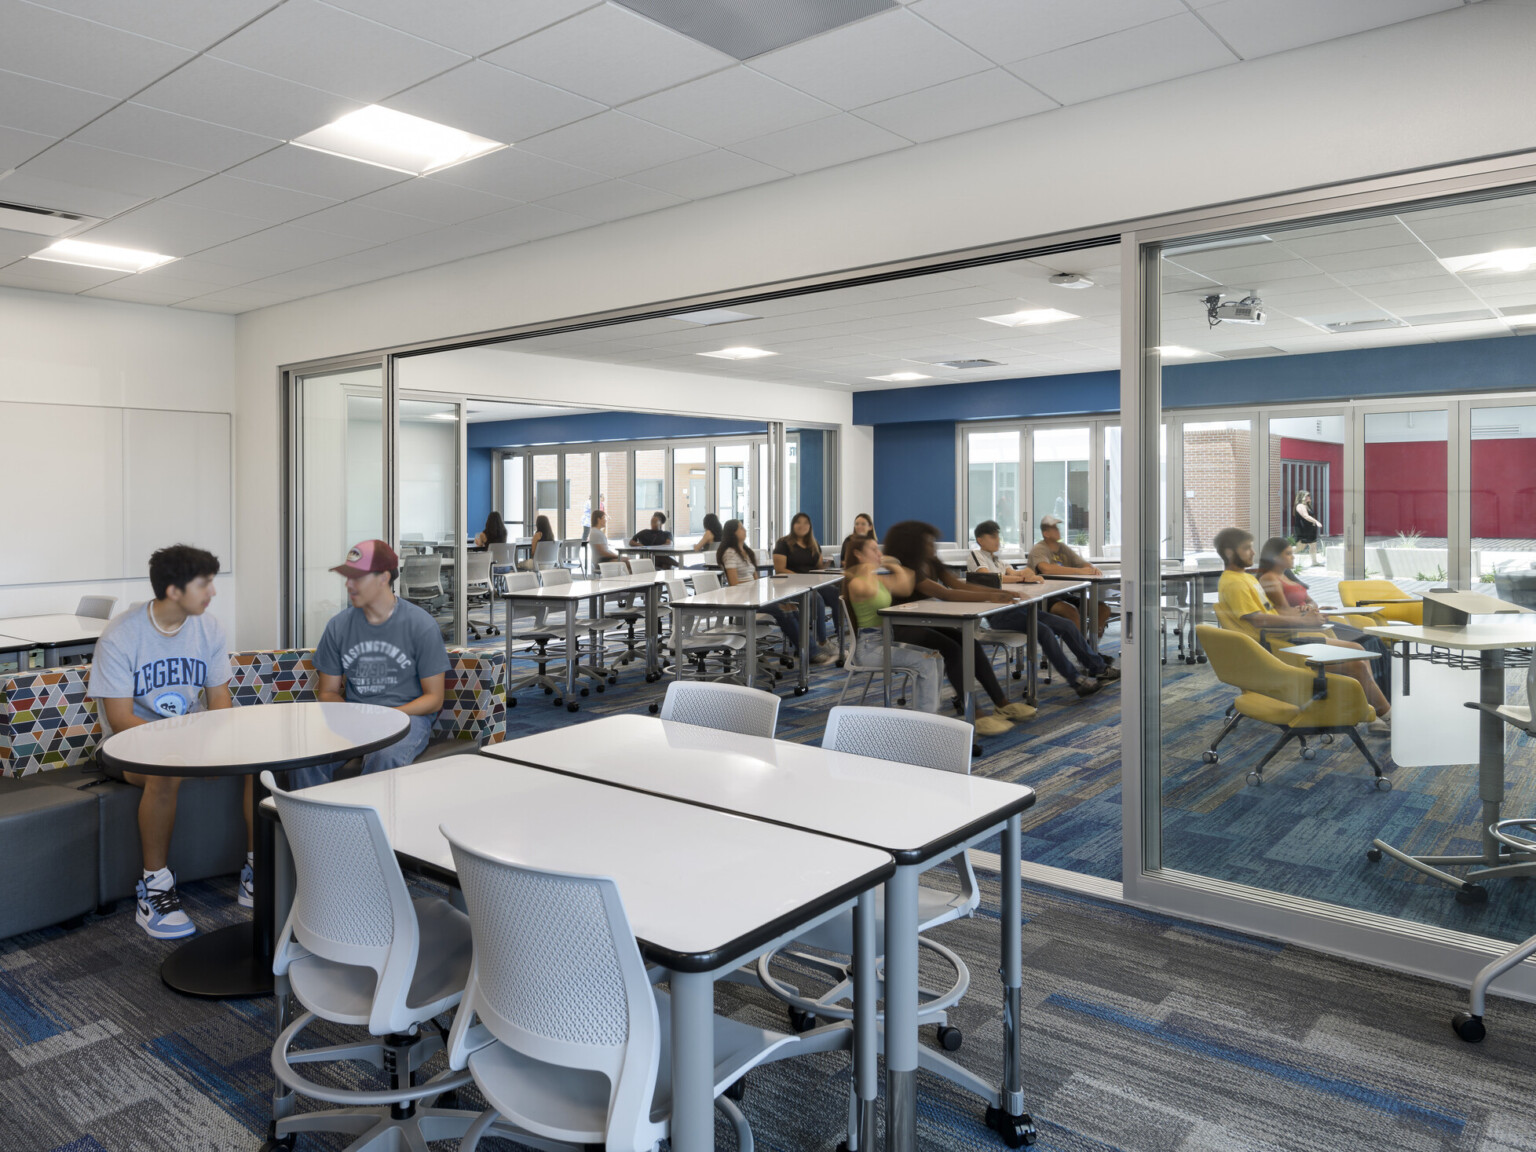 study area outside classroom with students in various seating areas, instructor, overhead lighting, blue and grey geometric carpeting, blue accent wall, glass partition between two classrooms invite collaboration